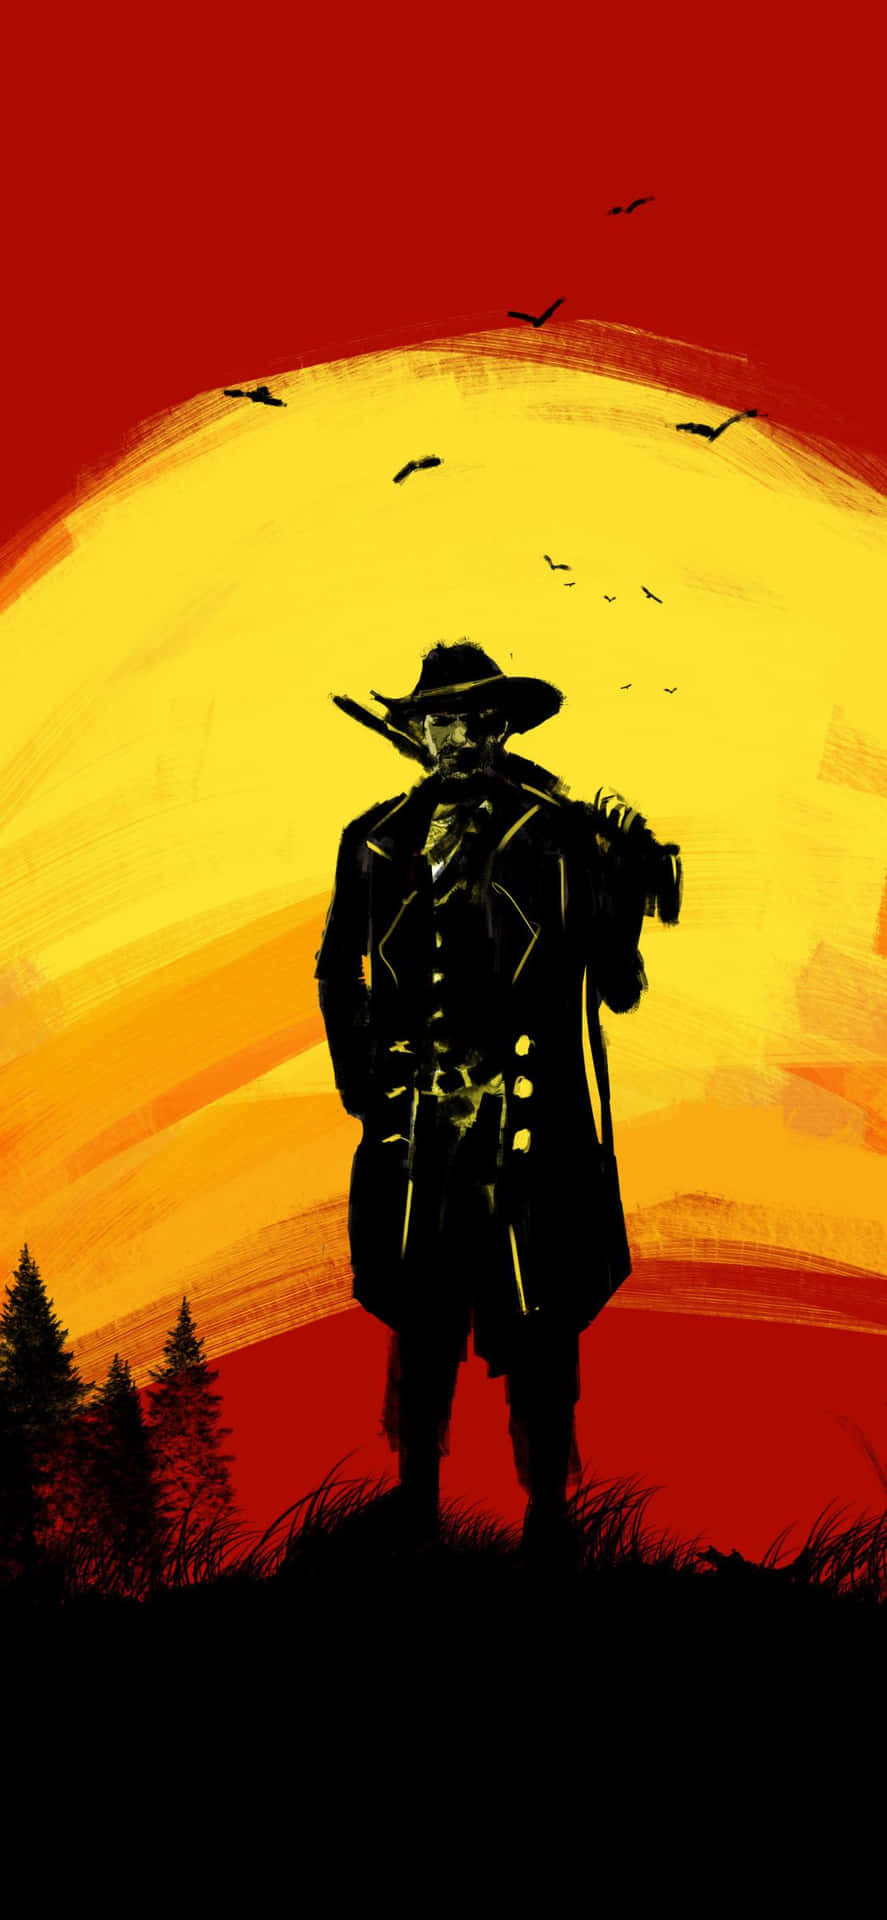 Best Red Dead Redemption 2 Painting Of A Cowboy With A Shotgun Background